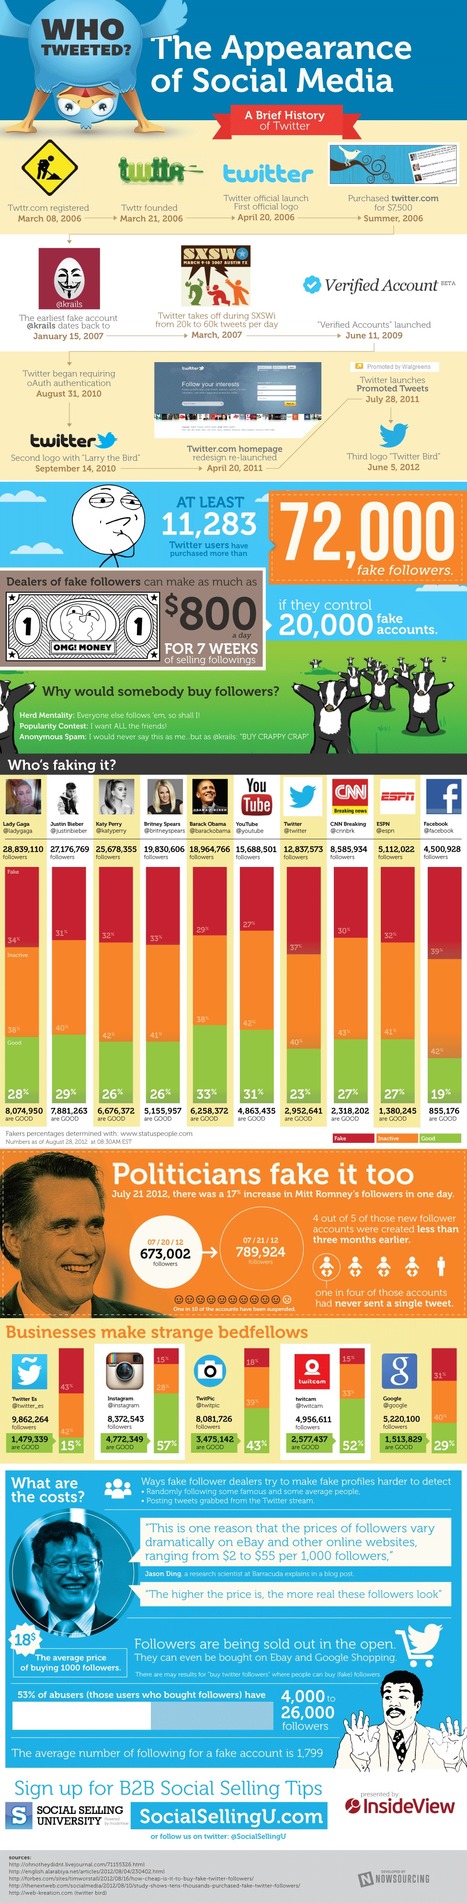 How Do You Sort Out Fake Followers From Real Ones on Twitter? [INFOGRAPHIC] | Social Media and its influence | Scoop.it